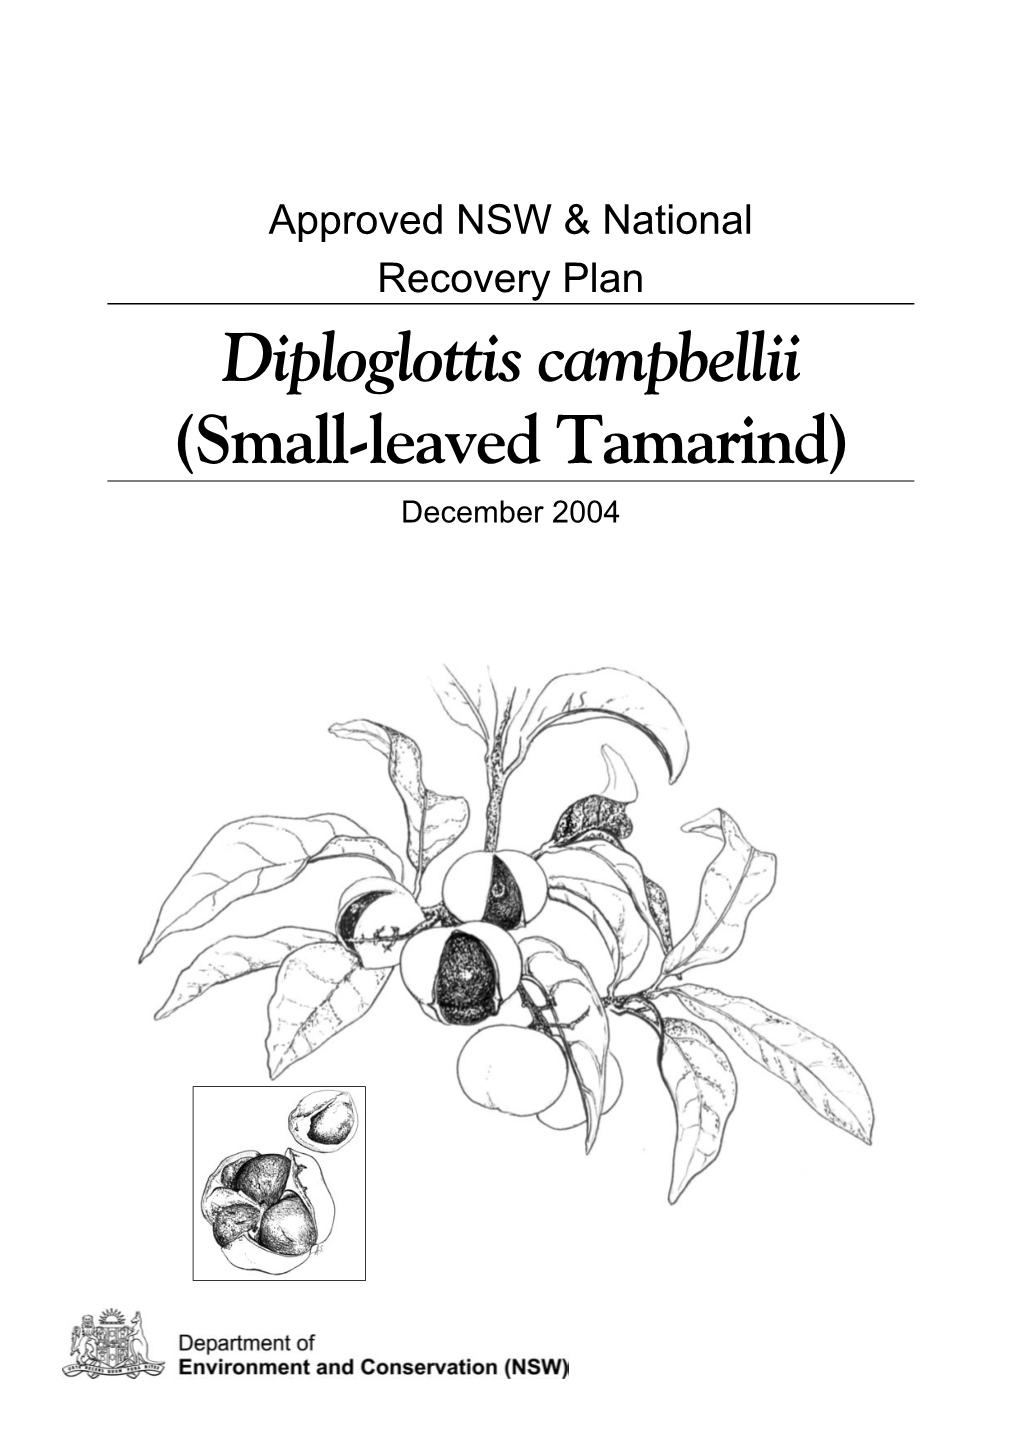 Approved NSW and National Recovery Plan, Diploglottis